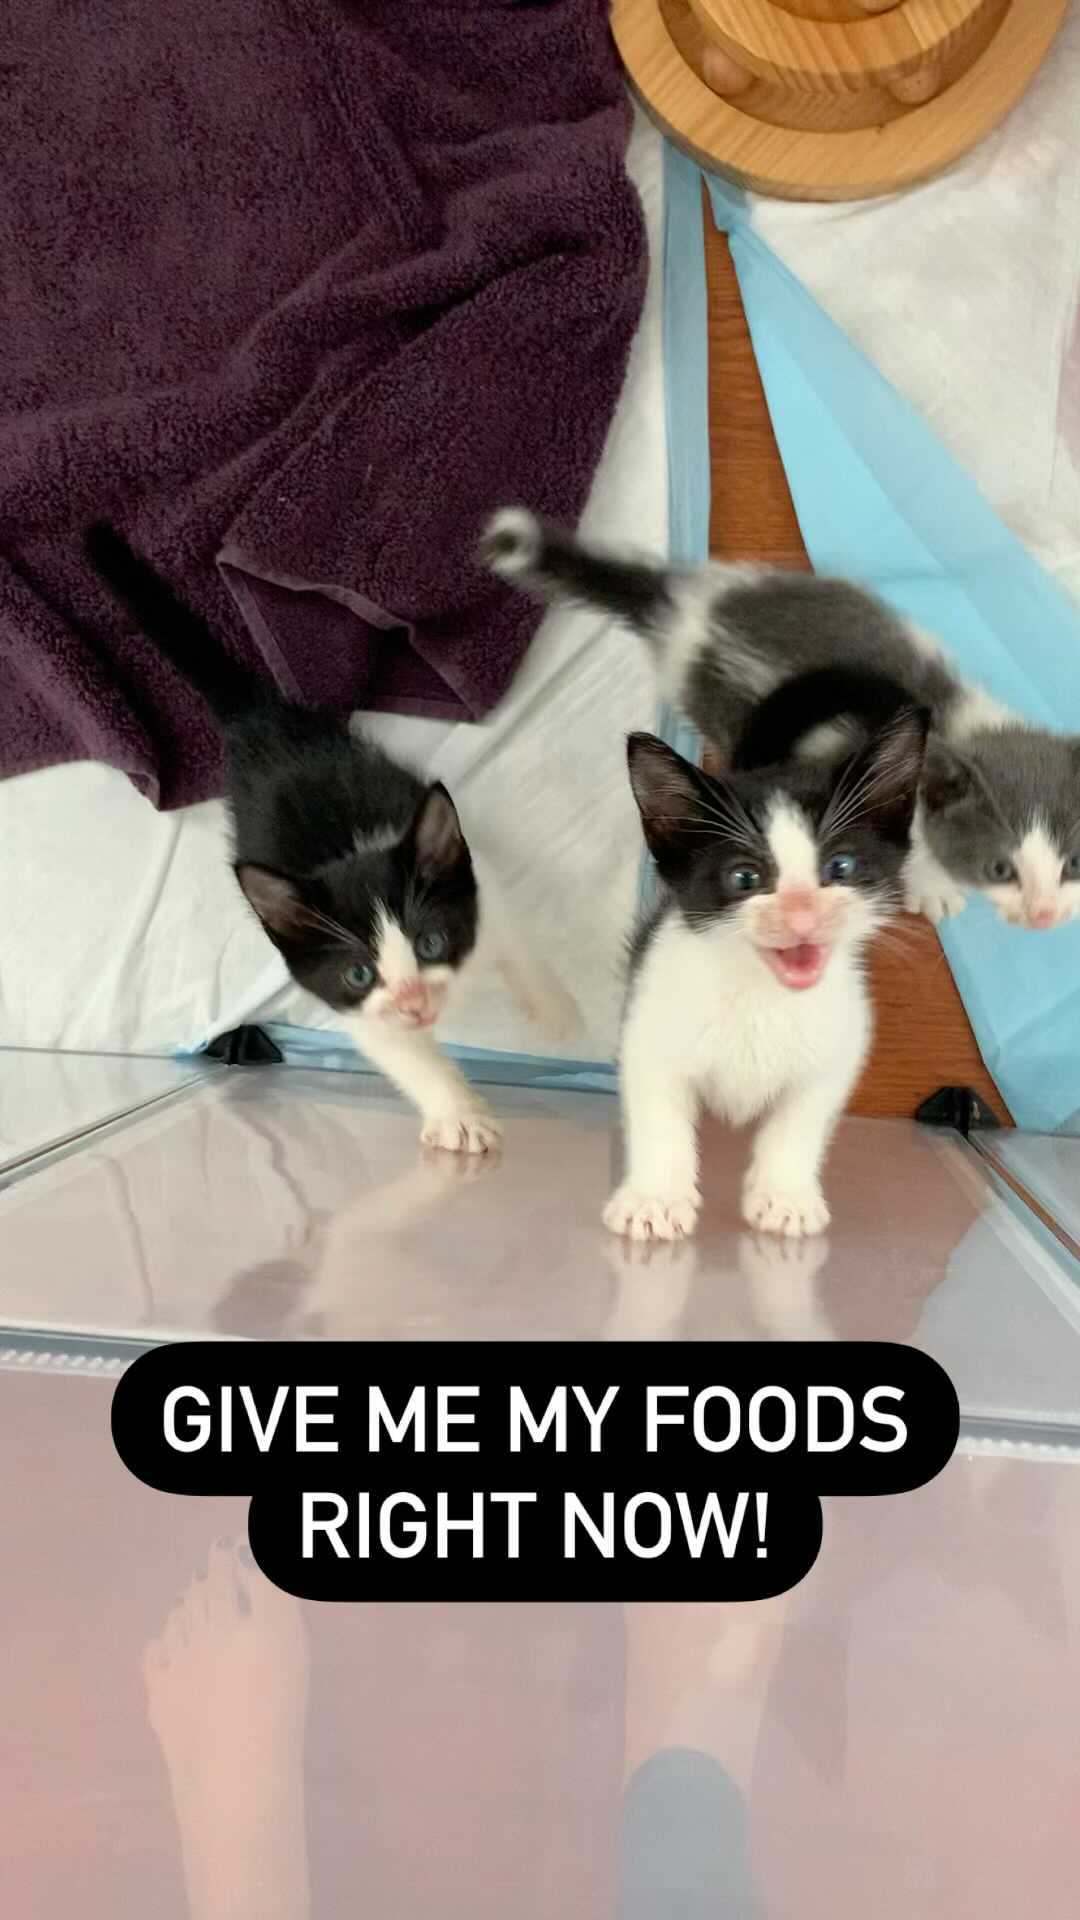 “We haven’t eated since the last time we eated 😢”

<a target='_blank' href='https://www.instagram.com/explore/tags/kittens/'>#kittens</a> <a target='_blank' href='https://www.instagram.com/explore/tags/kittenlife/'>#kittenlife</a> <a target='_blank' href='https://www.instagram.com/explore/tags/kittensofig/'>#kittensofig</a> <a target='_blank' href='https://www.instagram.com/explore/tags/rescuekittens/'>#rescuekittens</a> <a target='_blank' href='https://www.instagram.com/explore/tags/adoptdontshop/'>#adoptdontshop</a>❤️ <a target='_blank' href='https://www.instagram.com/explore/tags/catso/'>#catso</a>ﬁnstagram <a target='_blank' href='https://www.instagram.com/explore/tags/kittensdaily/'>#kittensdaily</a>